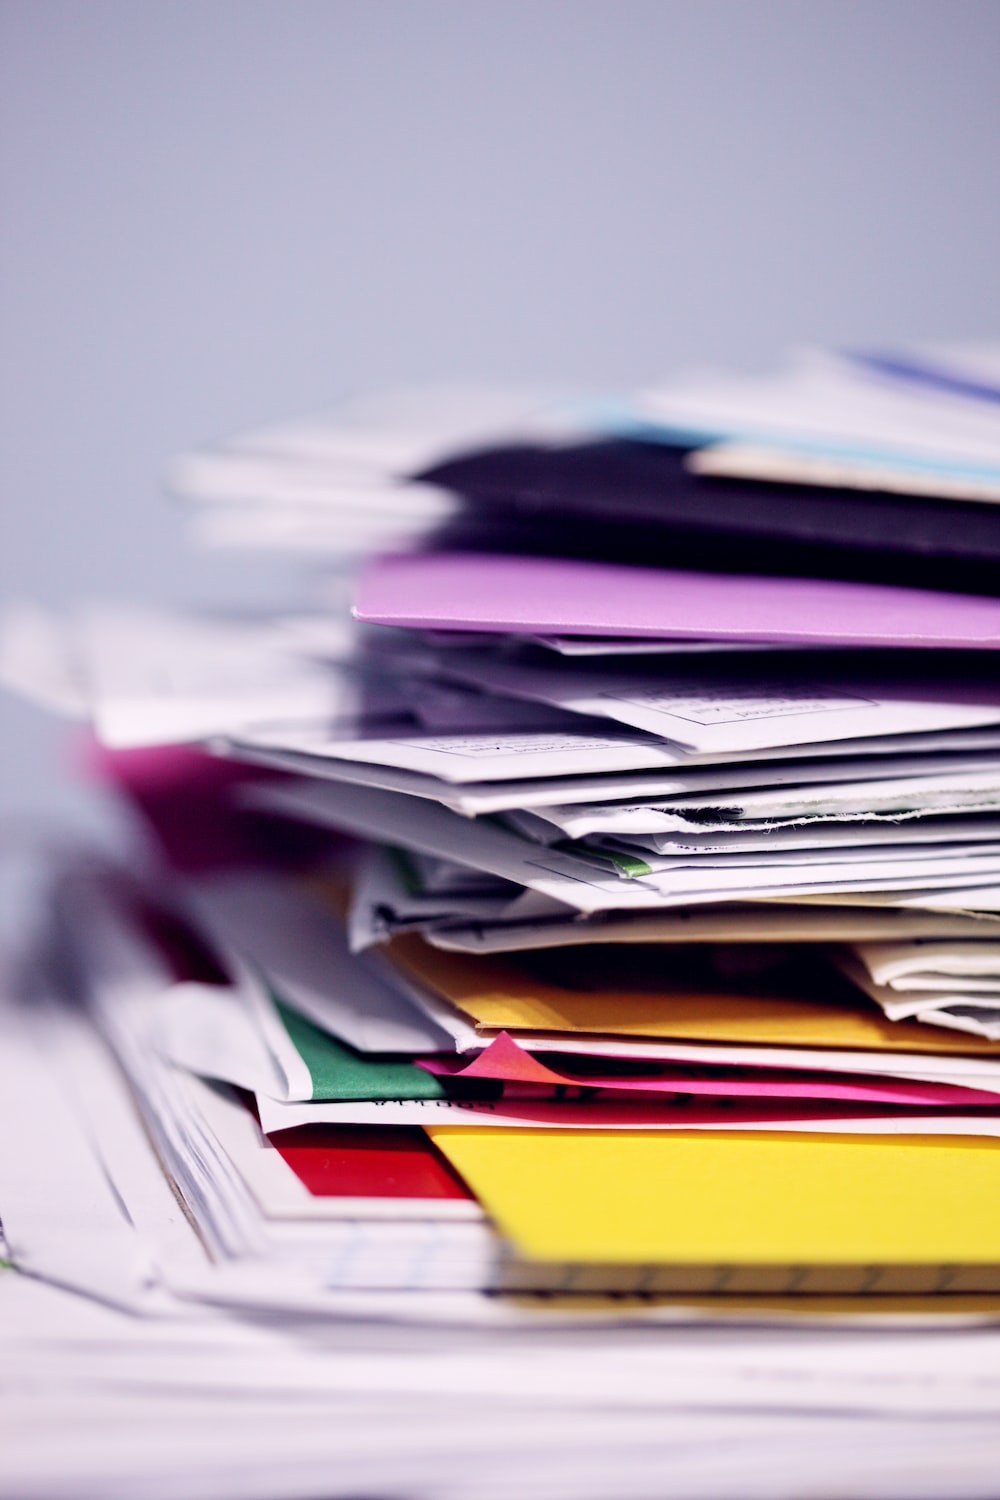 Why is filing system important?